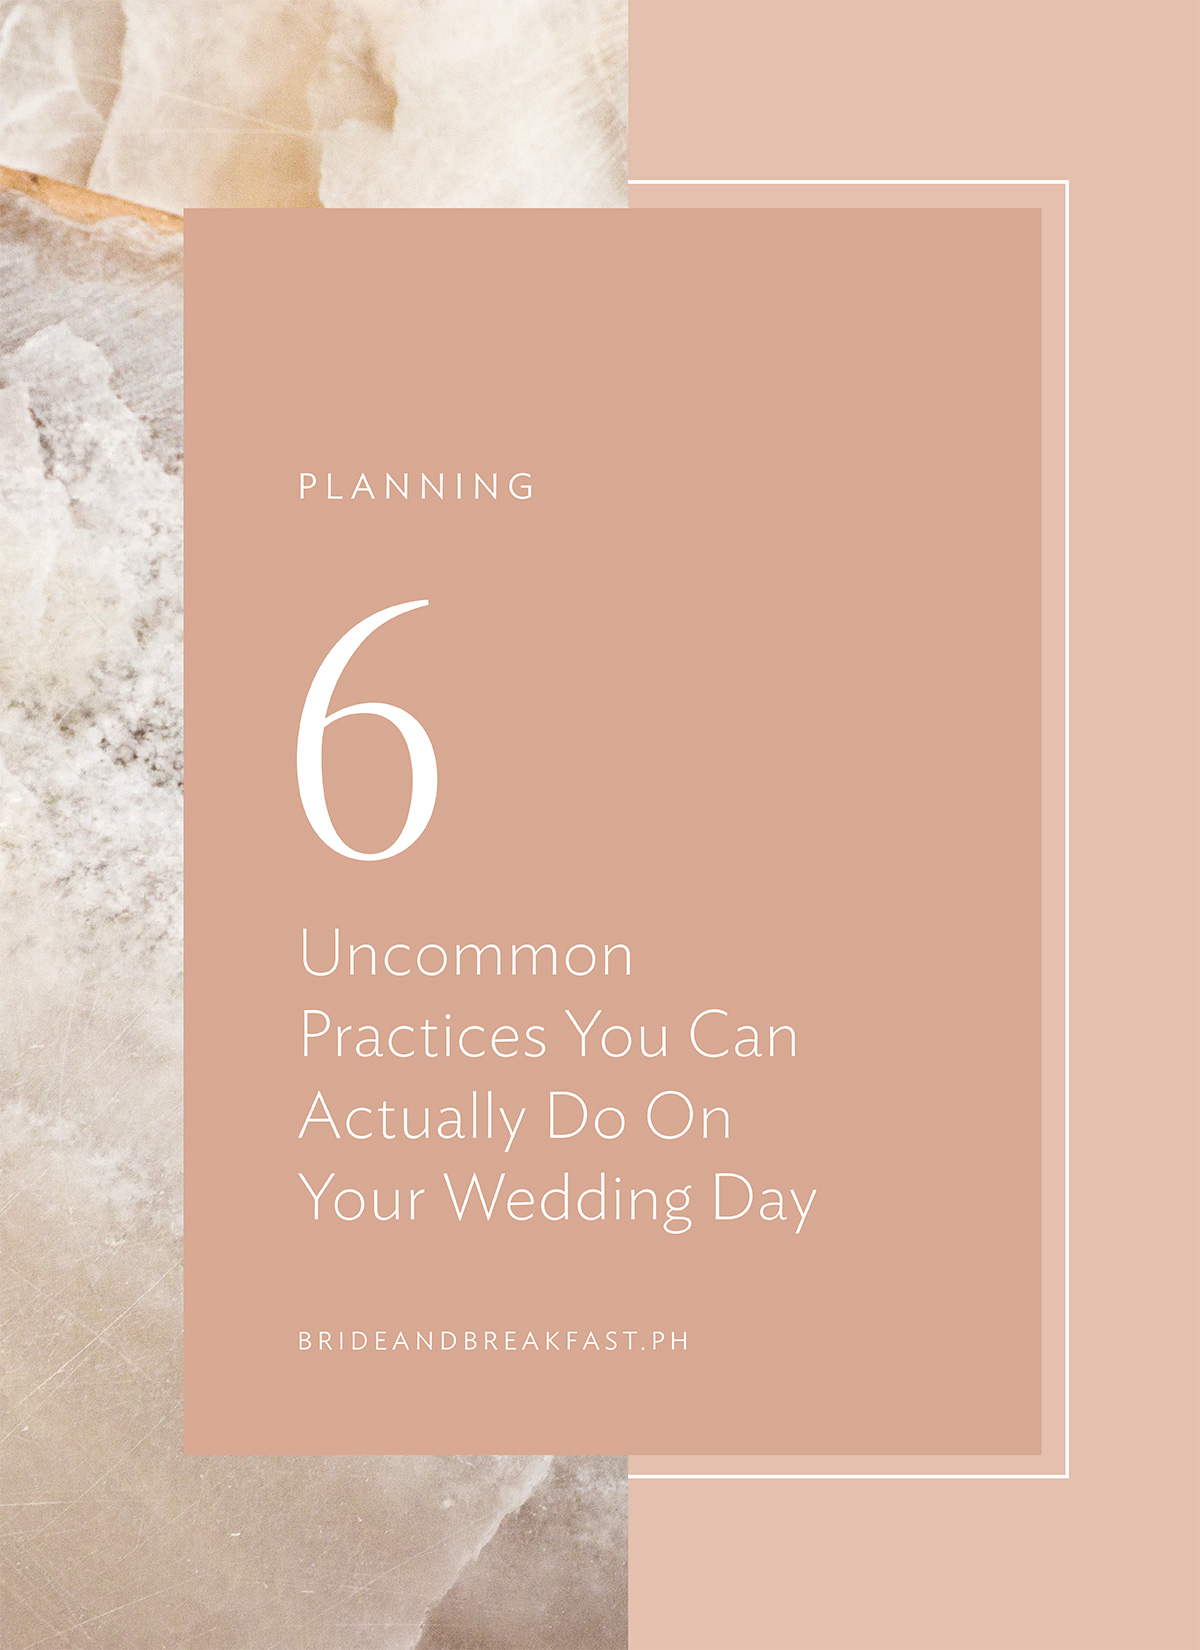 6 Uncommon Practices You Can Actually Do On Your Wedding Day